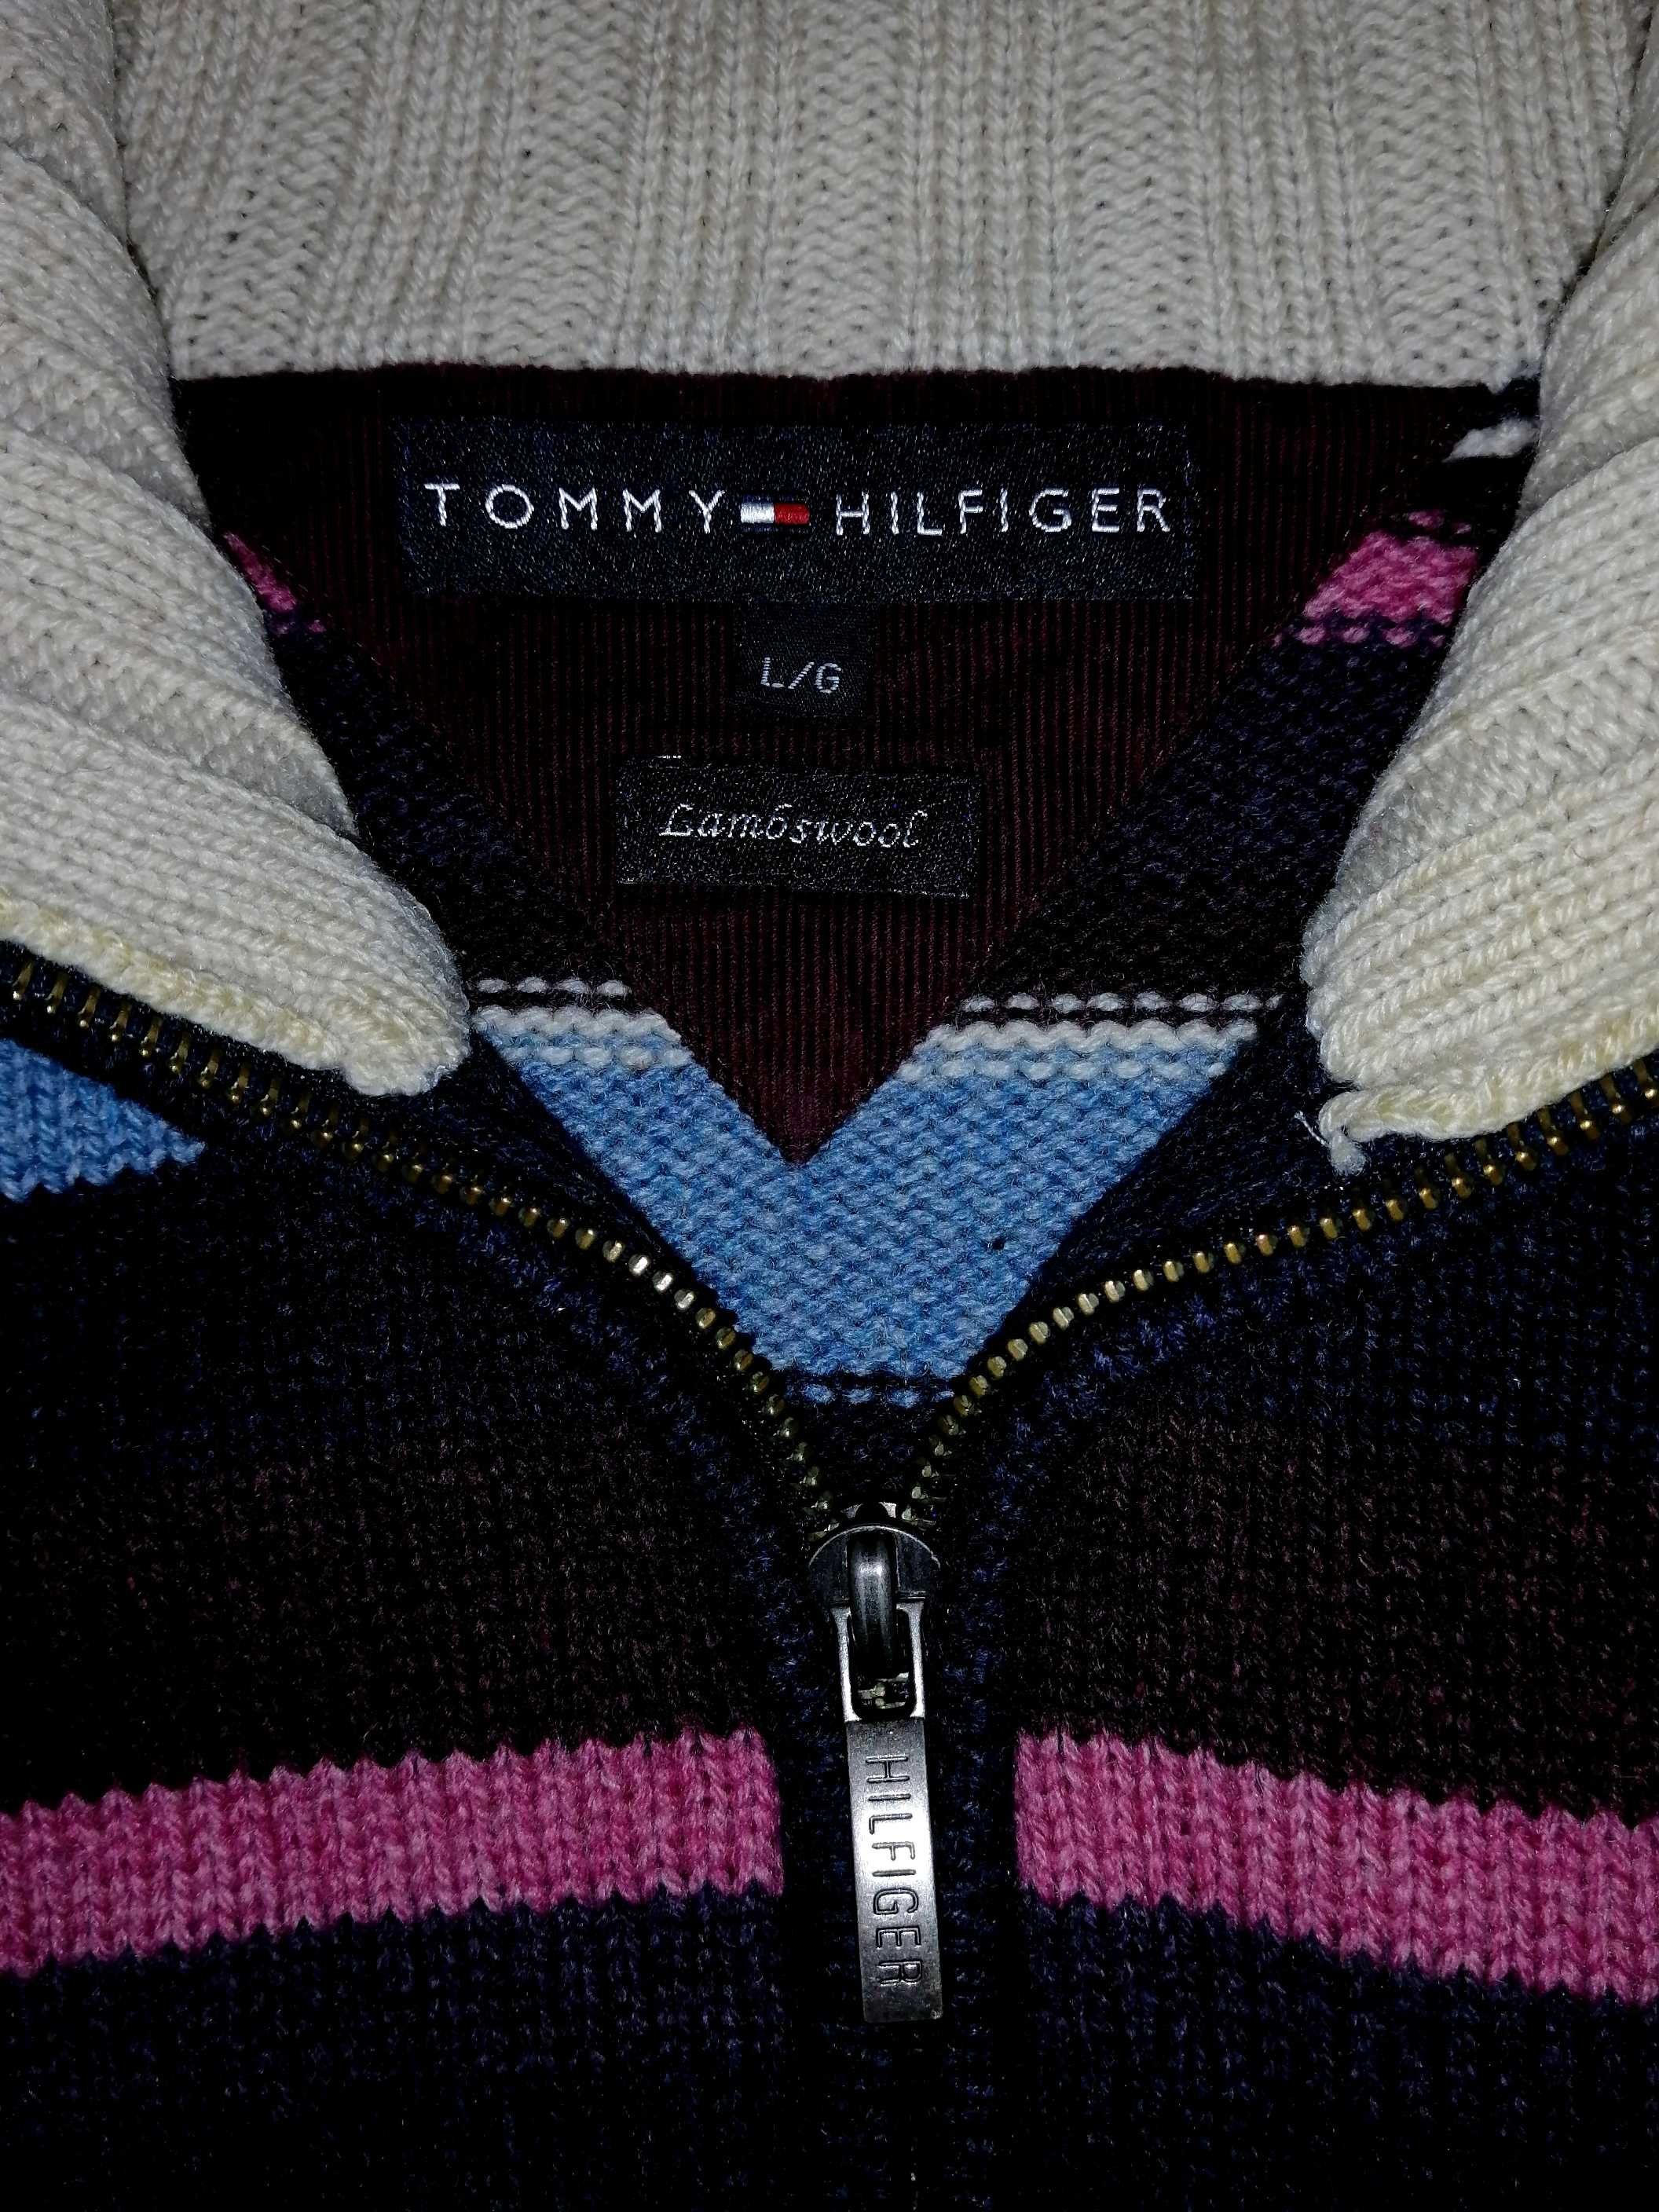 Tommy hilfiger pulover lambswool